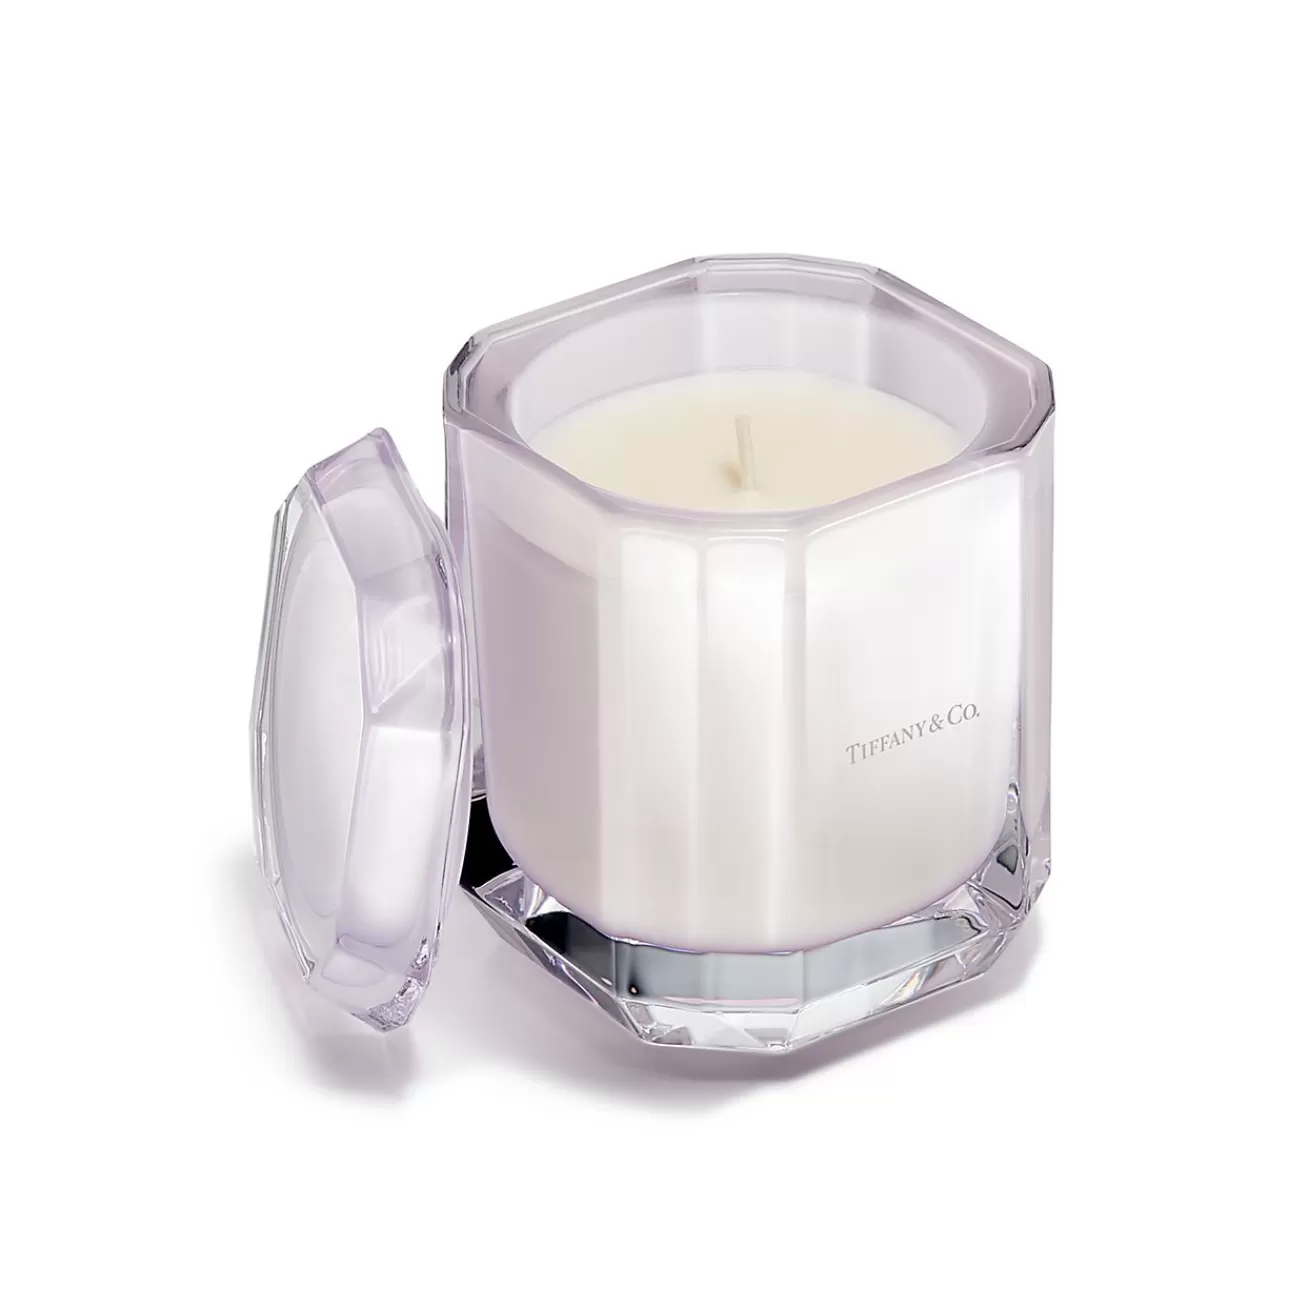 Tiffany & Co. Tiffany Facets About Love Candle in Kunzite-colored Glass | ^ Business Gifts | Decor